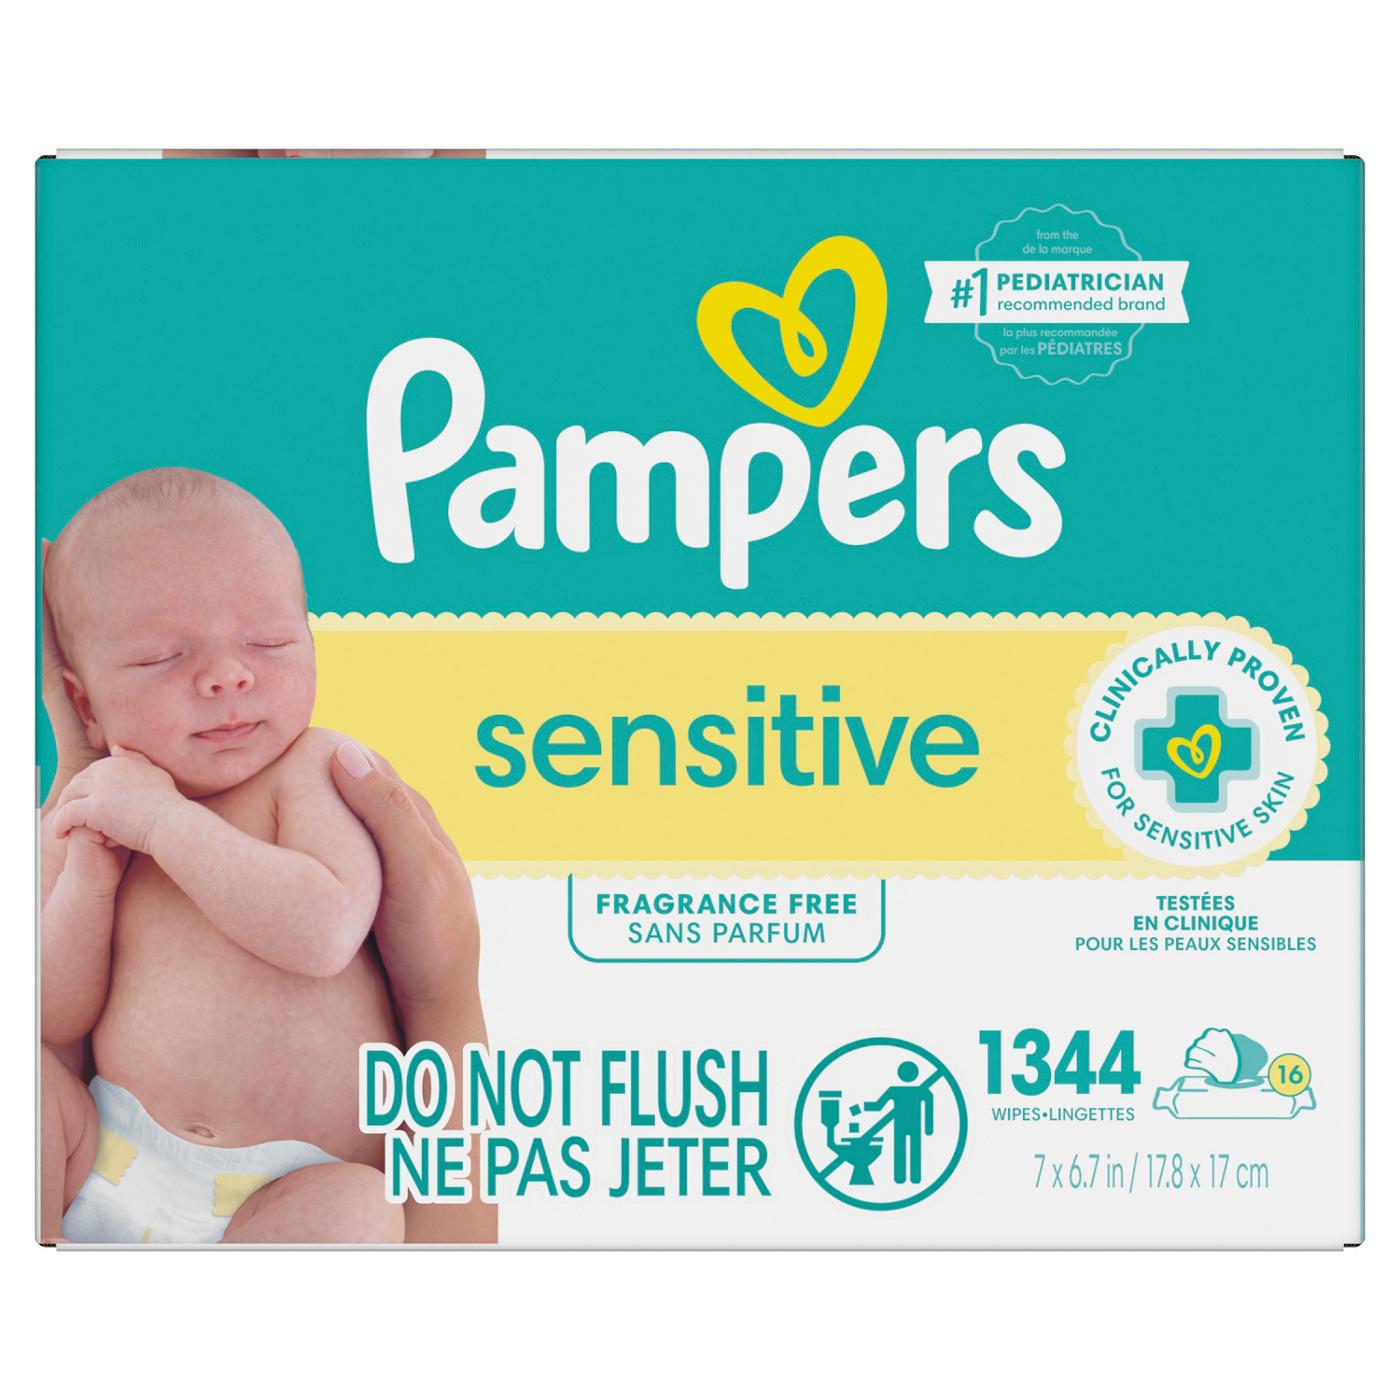 Pampers Sensitive Skin Baby Wipes; image 6 of 10